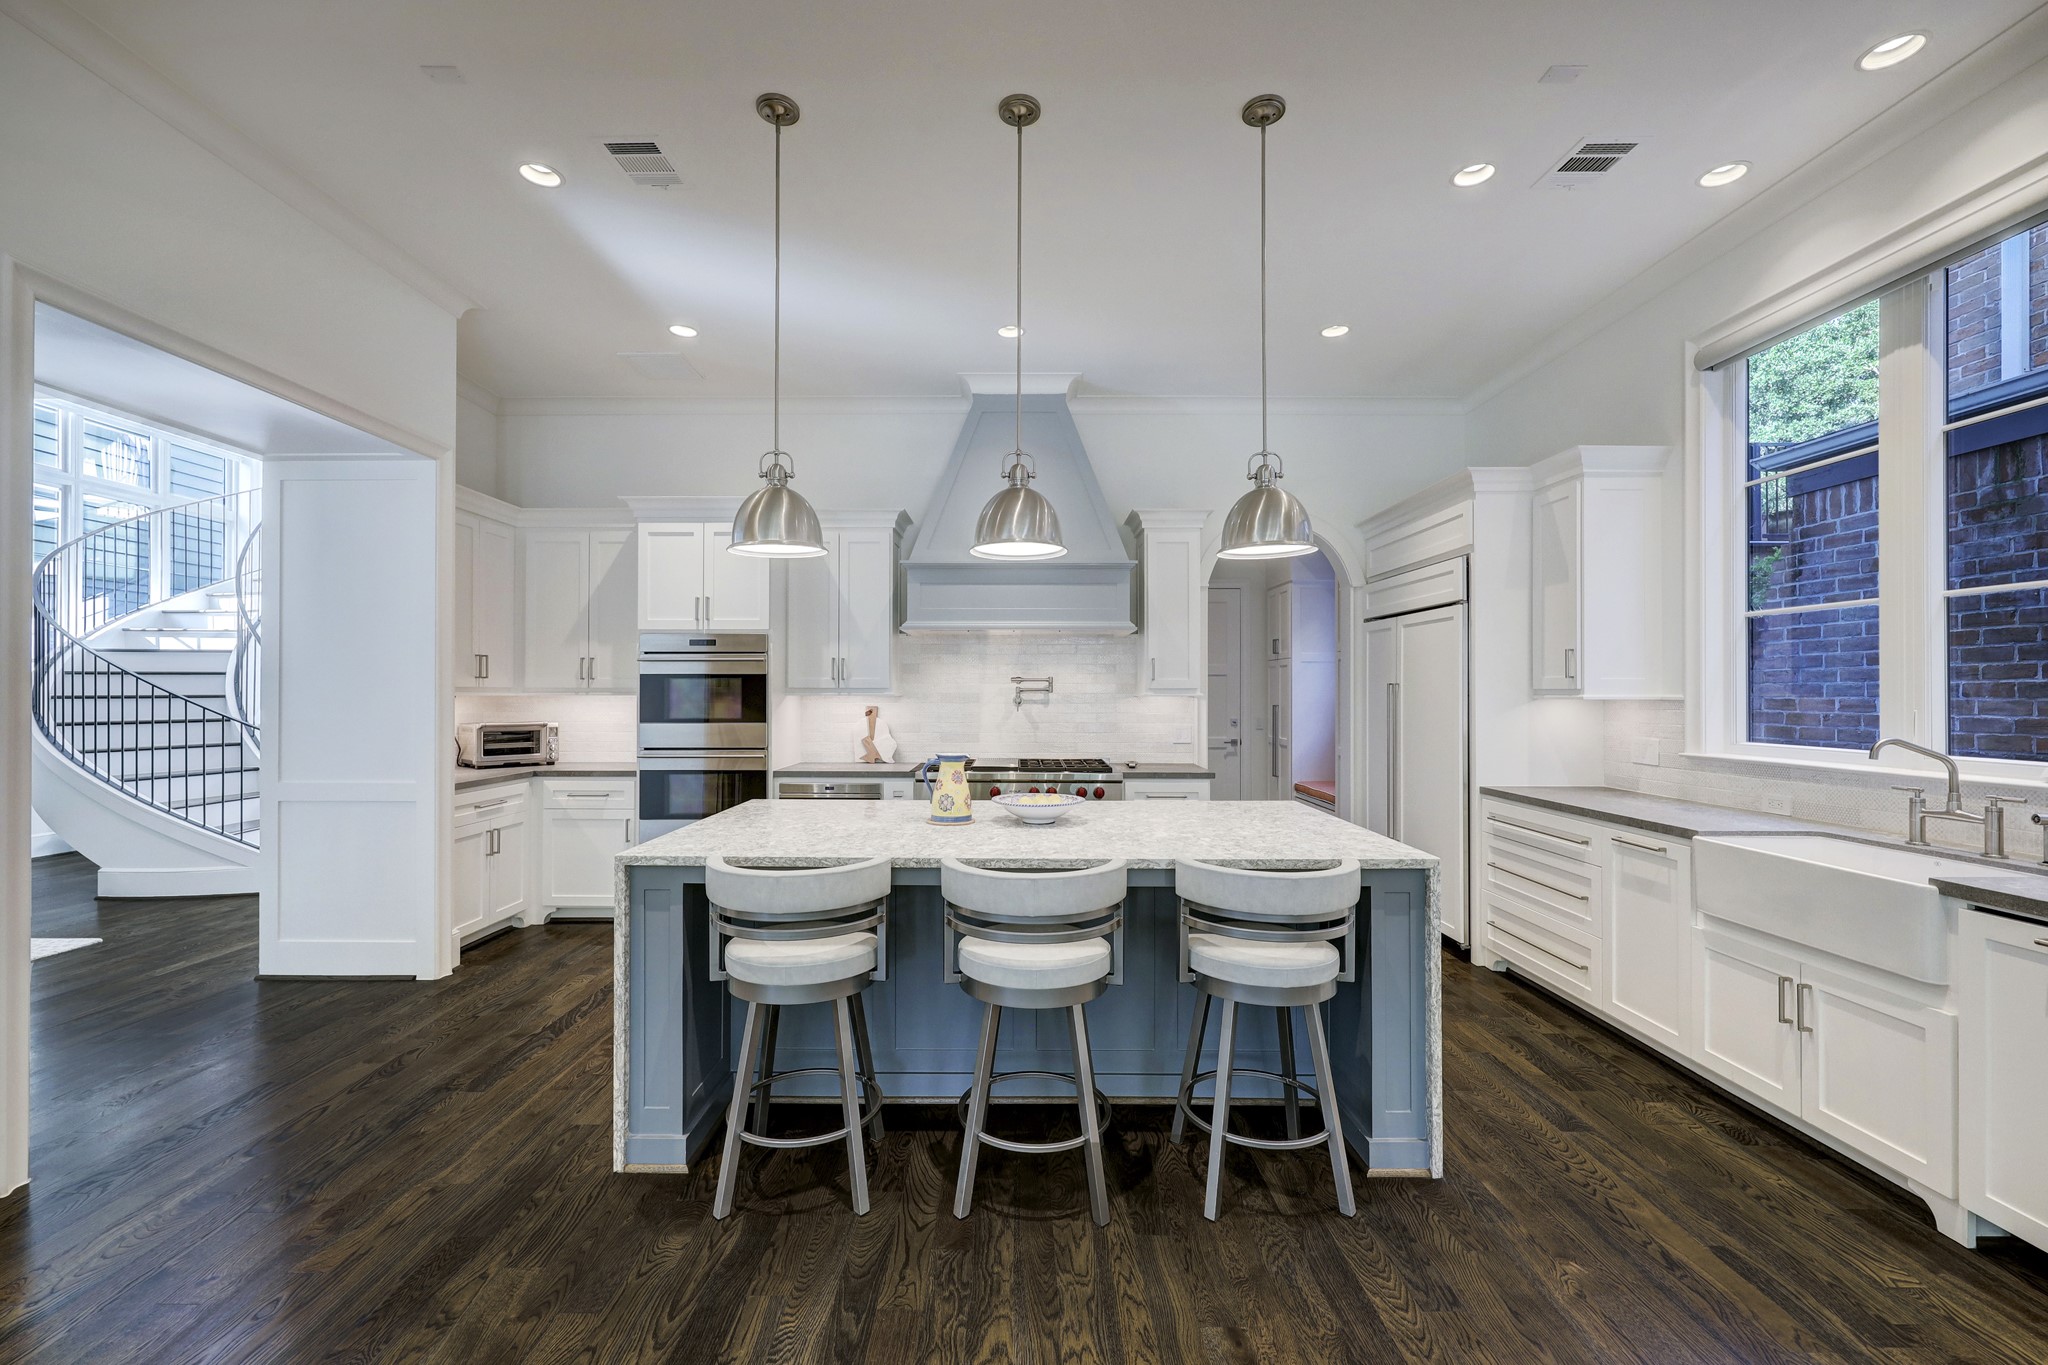 A culinary haven with 48-inch Subzero side-by-side freezer and fridge, 48-inch Wolf sixburner range with griddle, plus
30-inch Wolf double ovens and Wolf 24-inch microwave drawer. An abundance of
counter space plus room to gather completes this chef’s dream space.